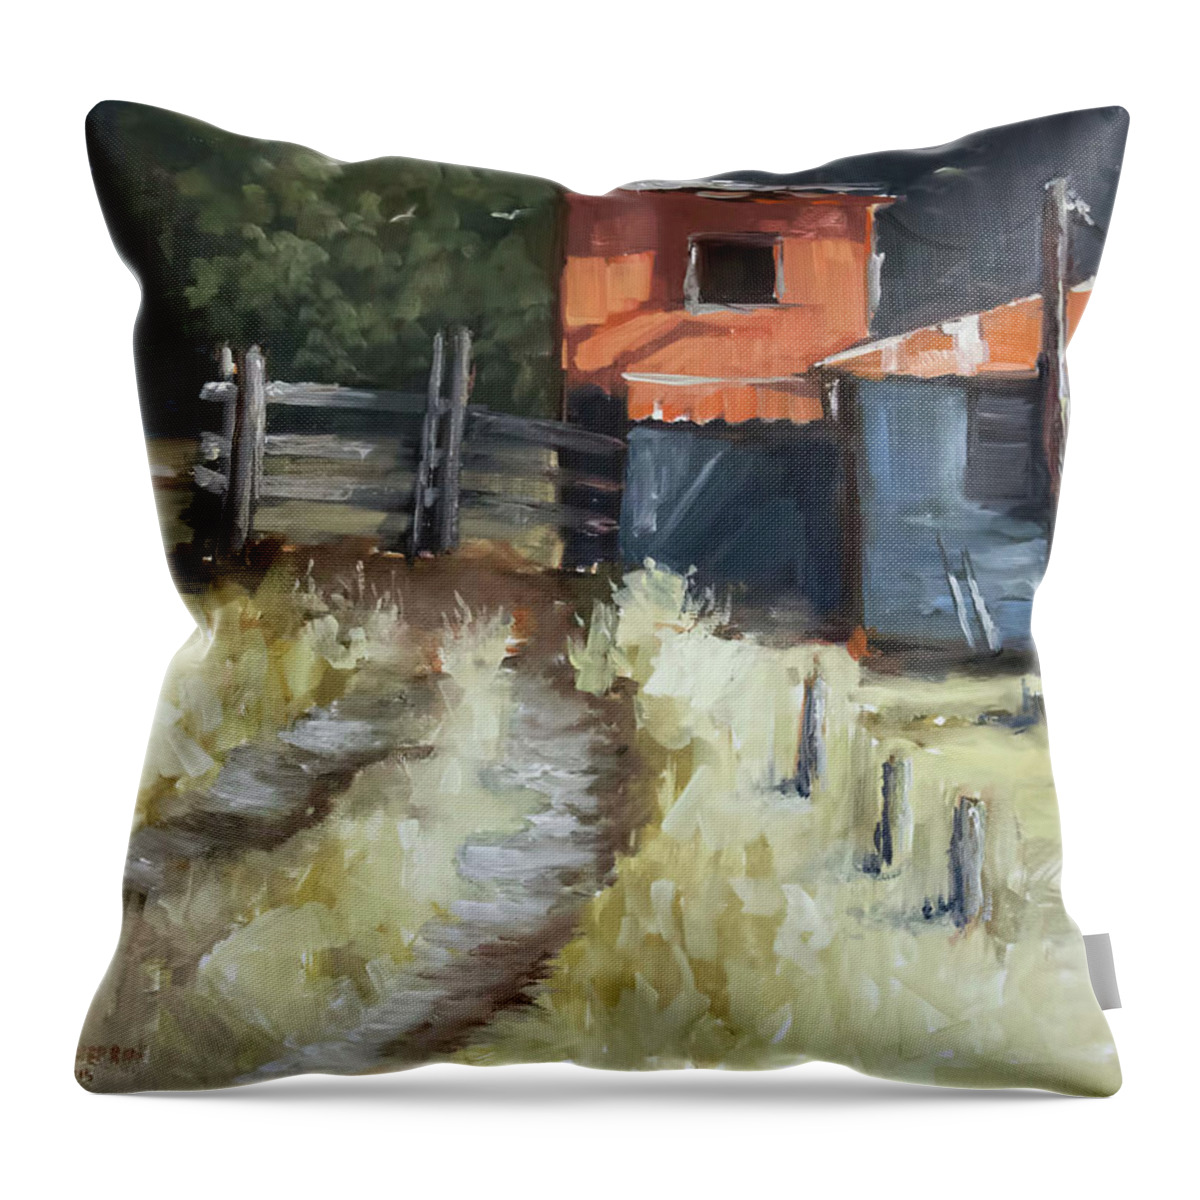 Shack Throw Pillow featuring the painting Old Shack by Melissa Herrin